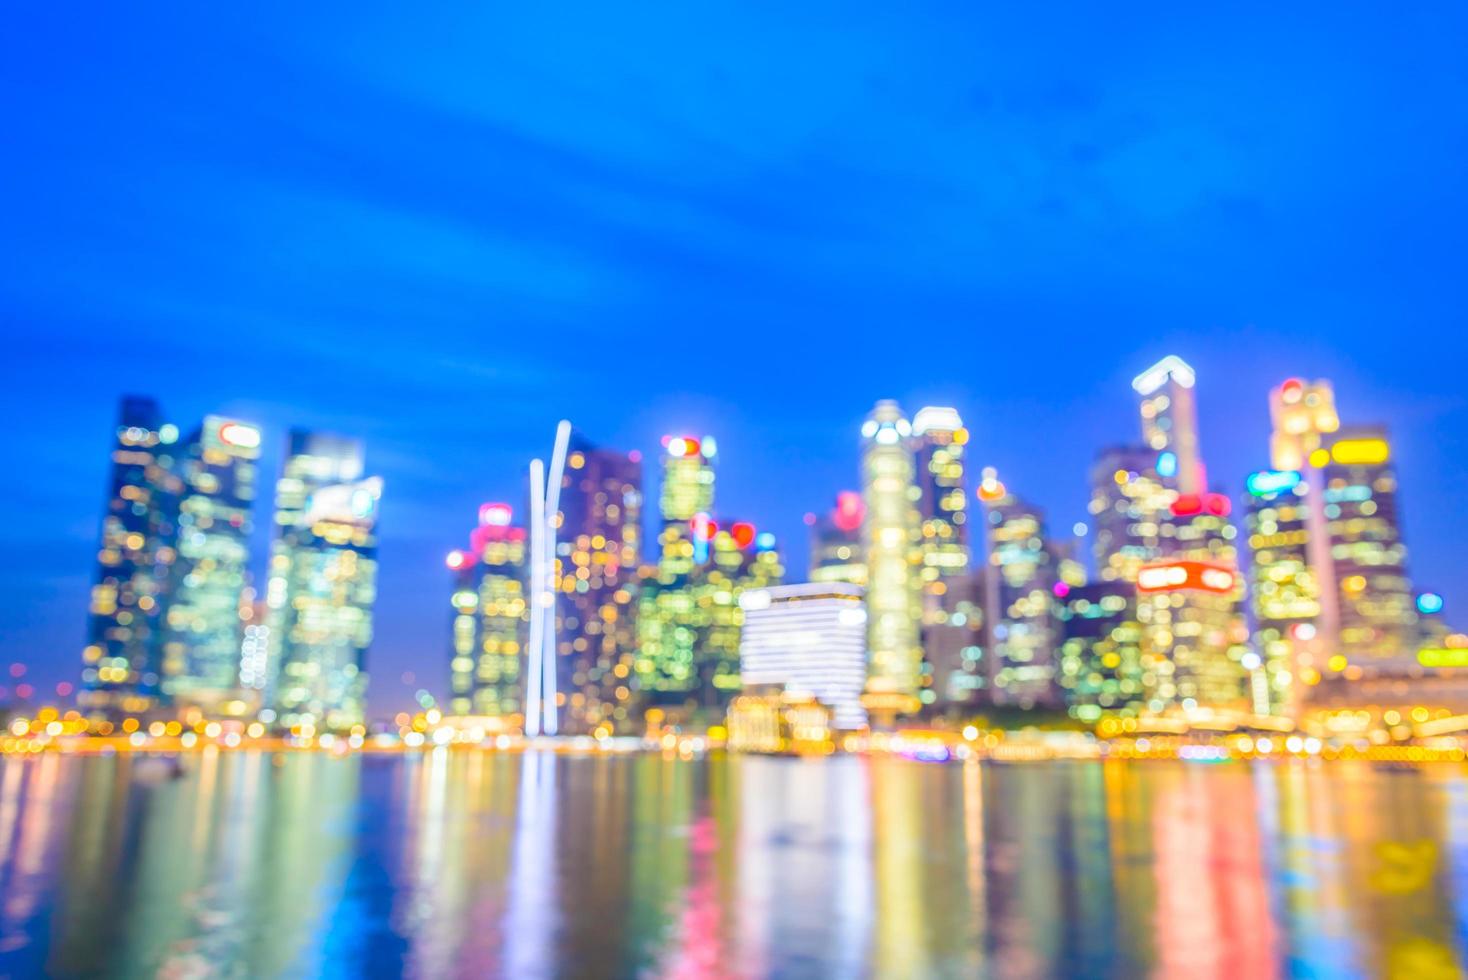 Abstract defocused Singapore city background photo